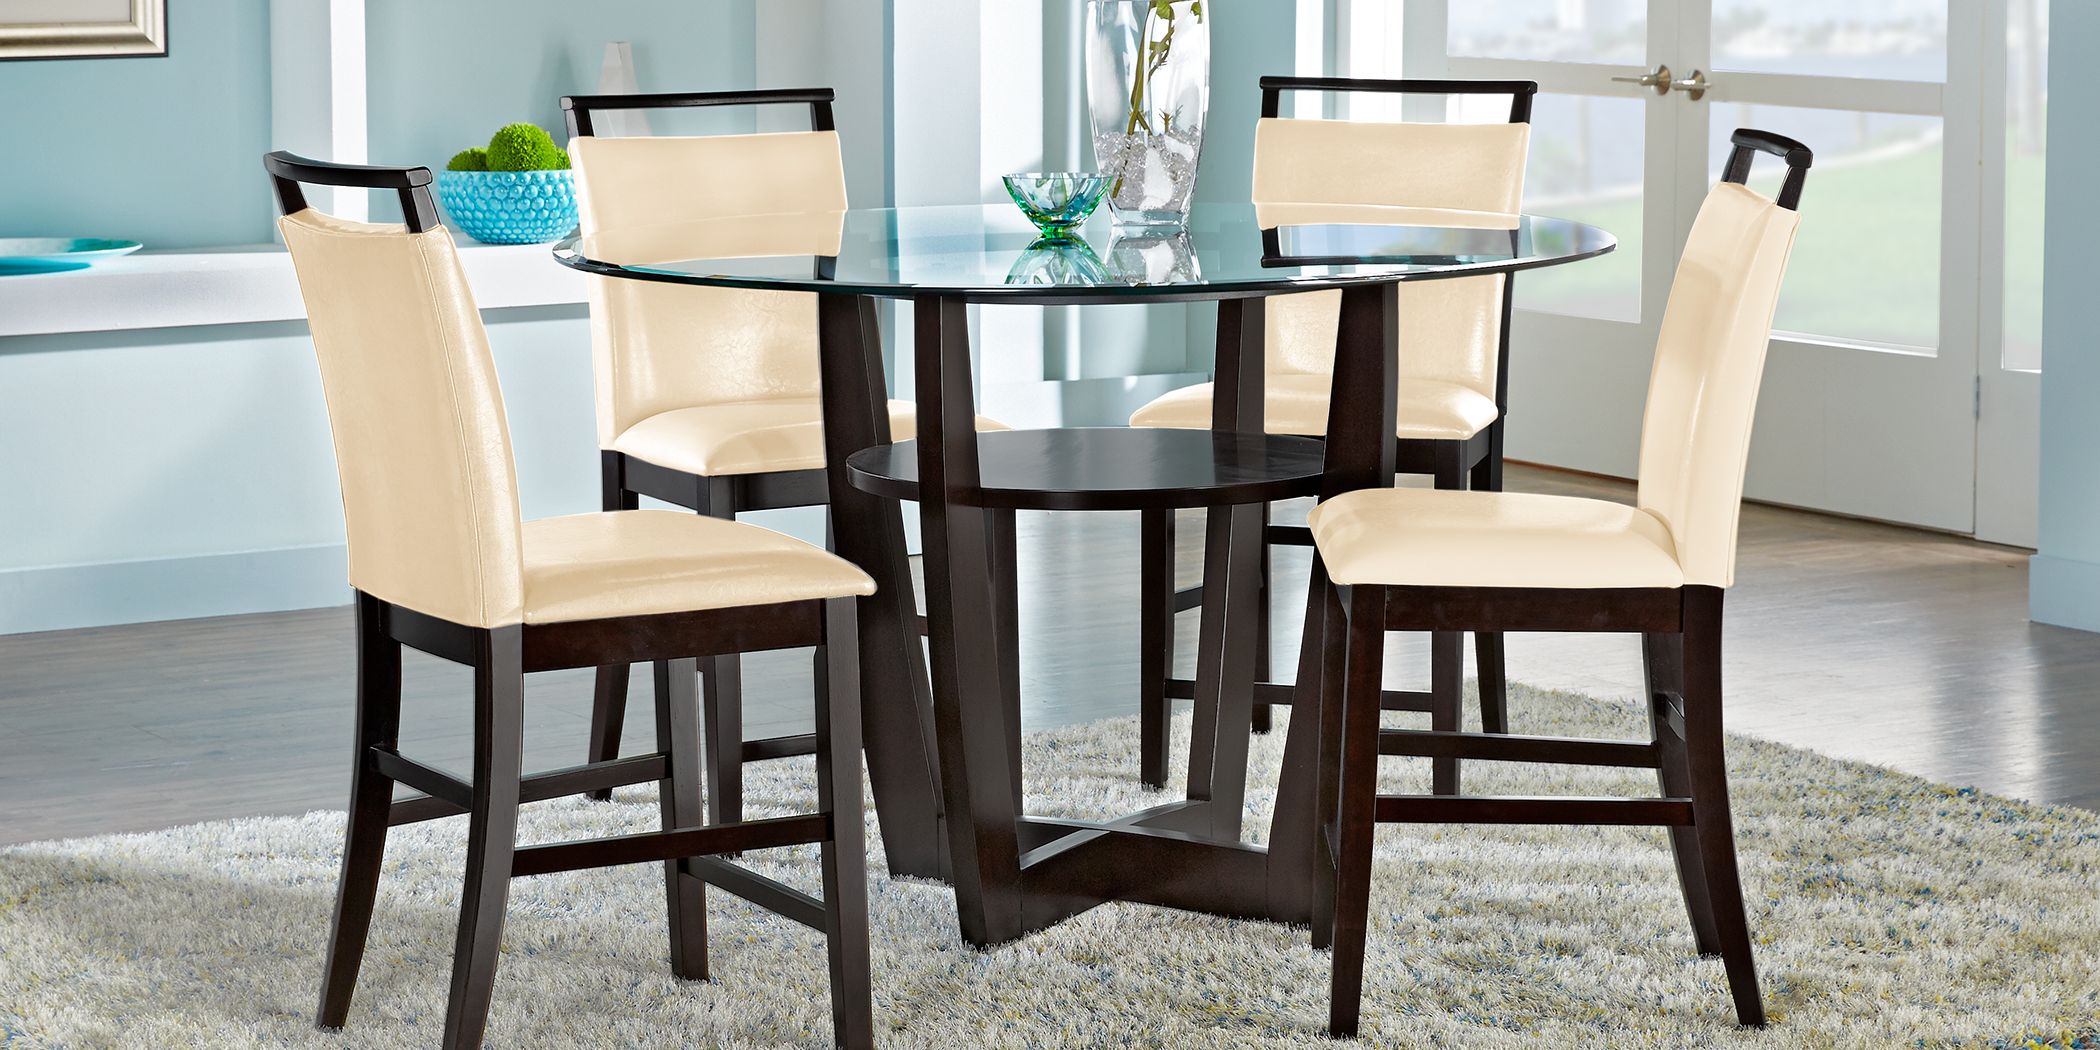 Glass Dining Table Sets, Glass Top Dining Table And Chairs Set